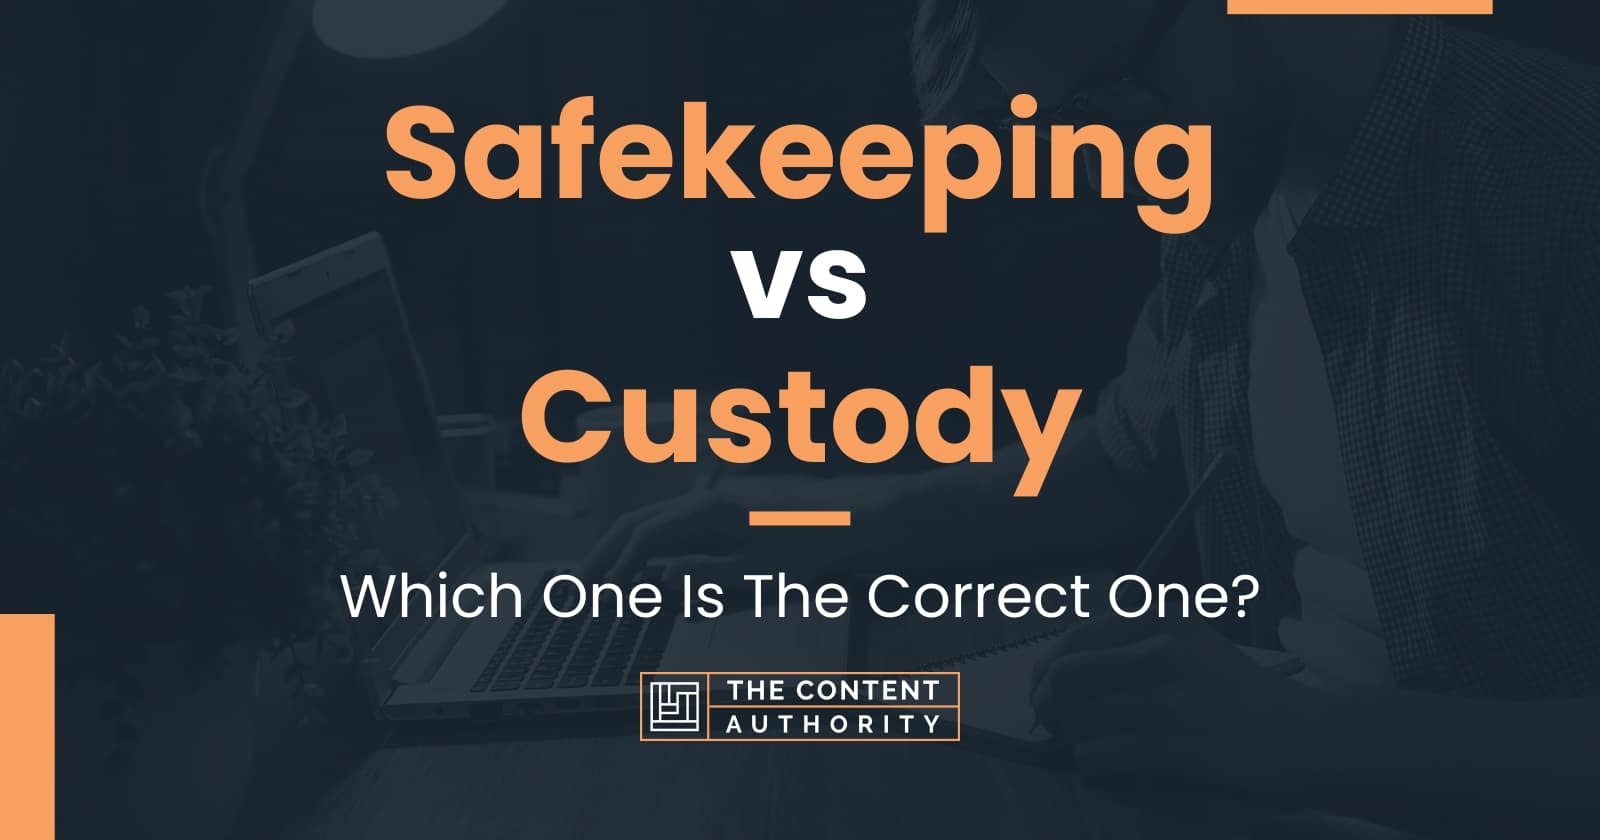 Safekeeping vs Custody: Which One Is The Correct One?